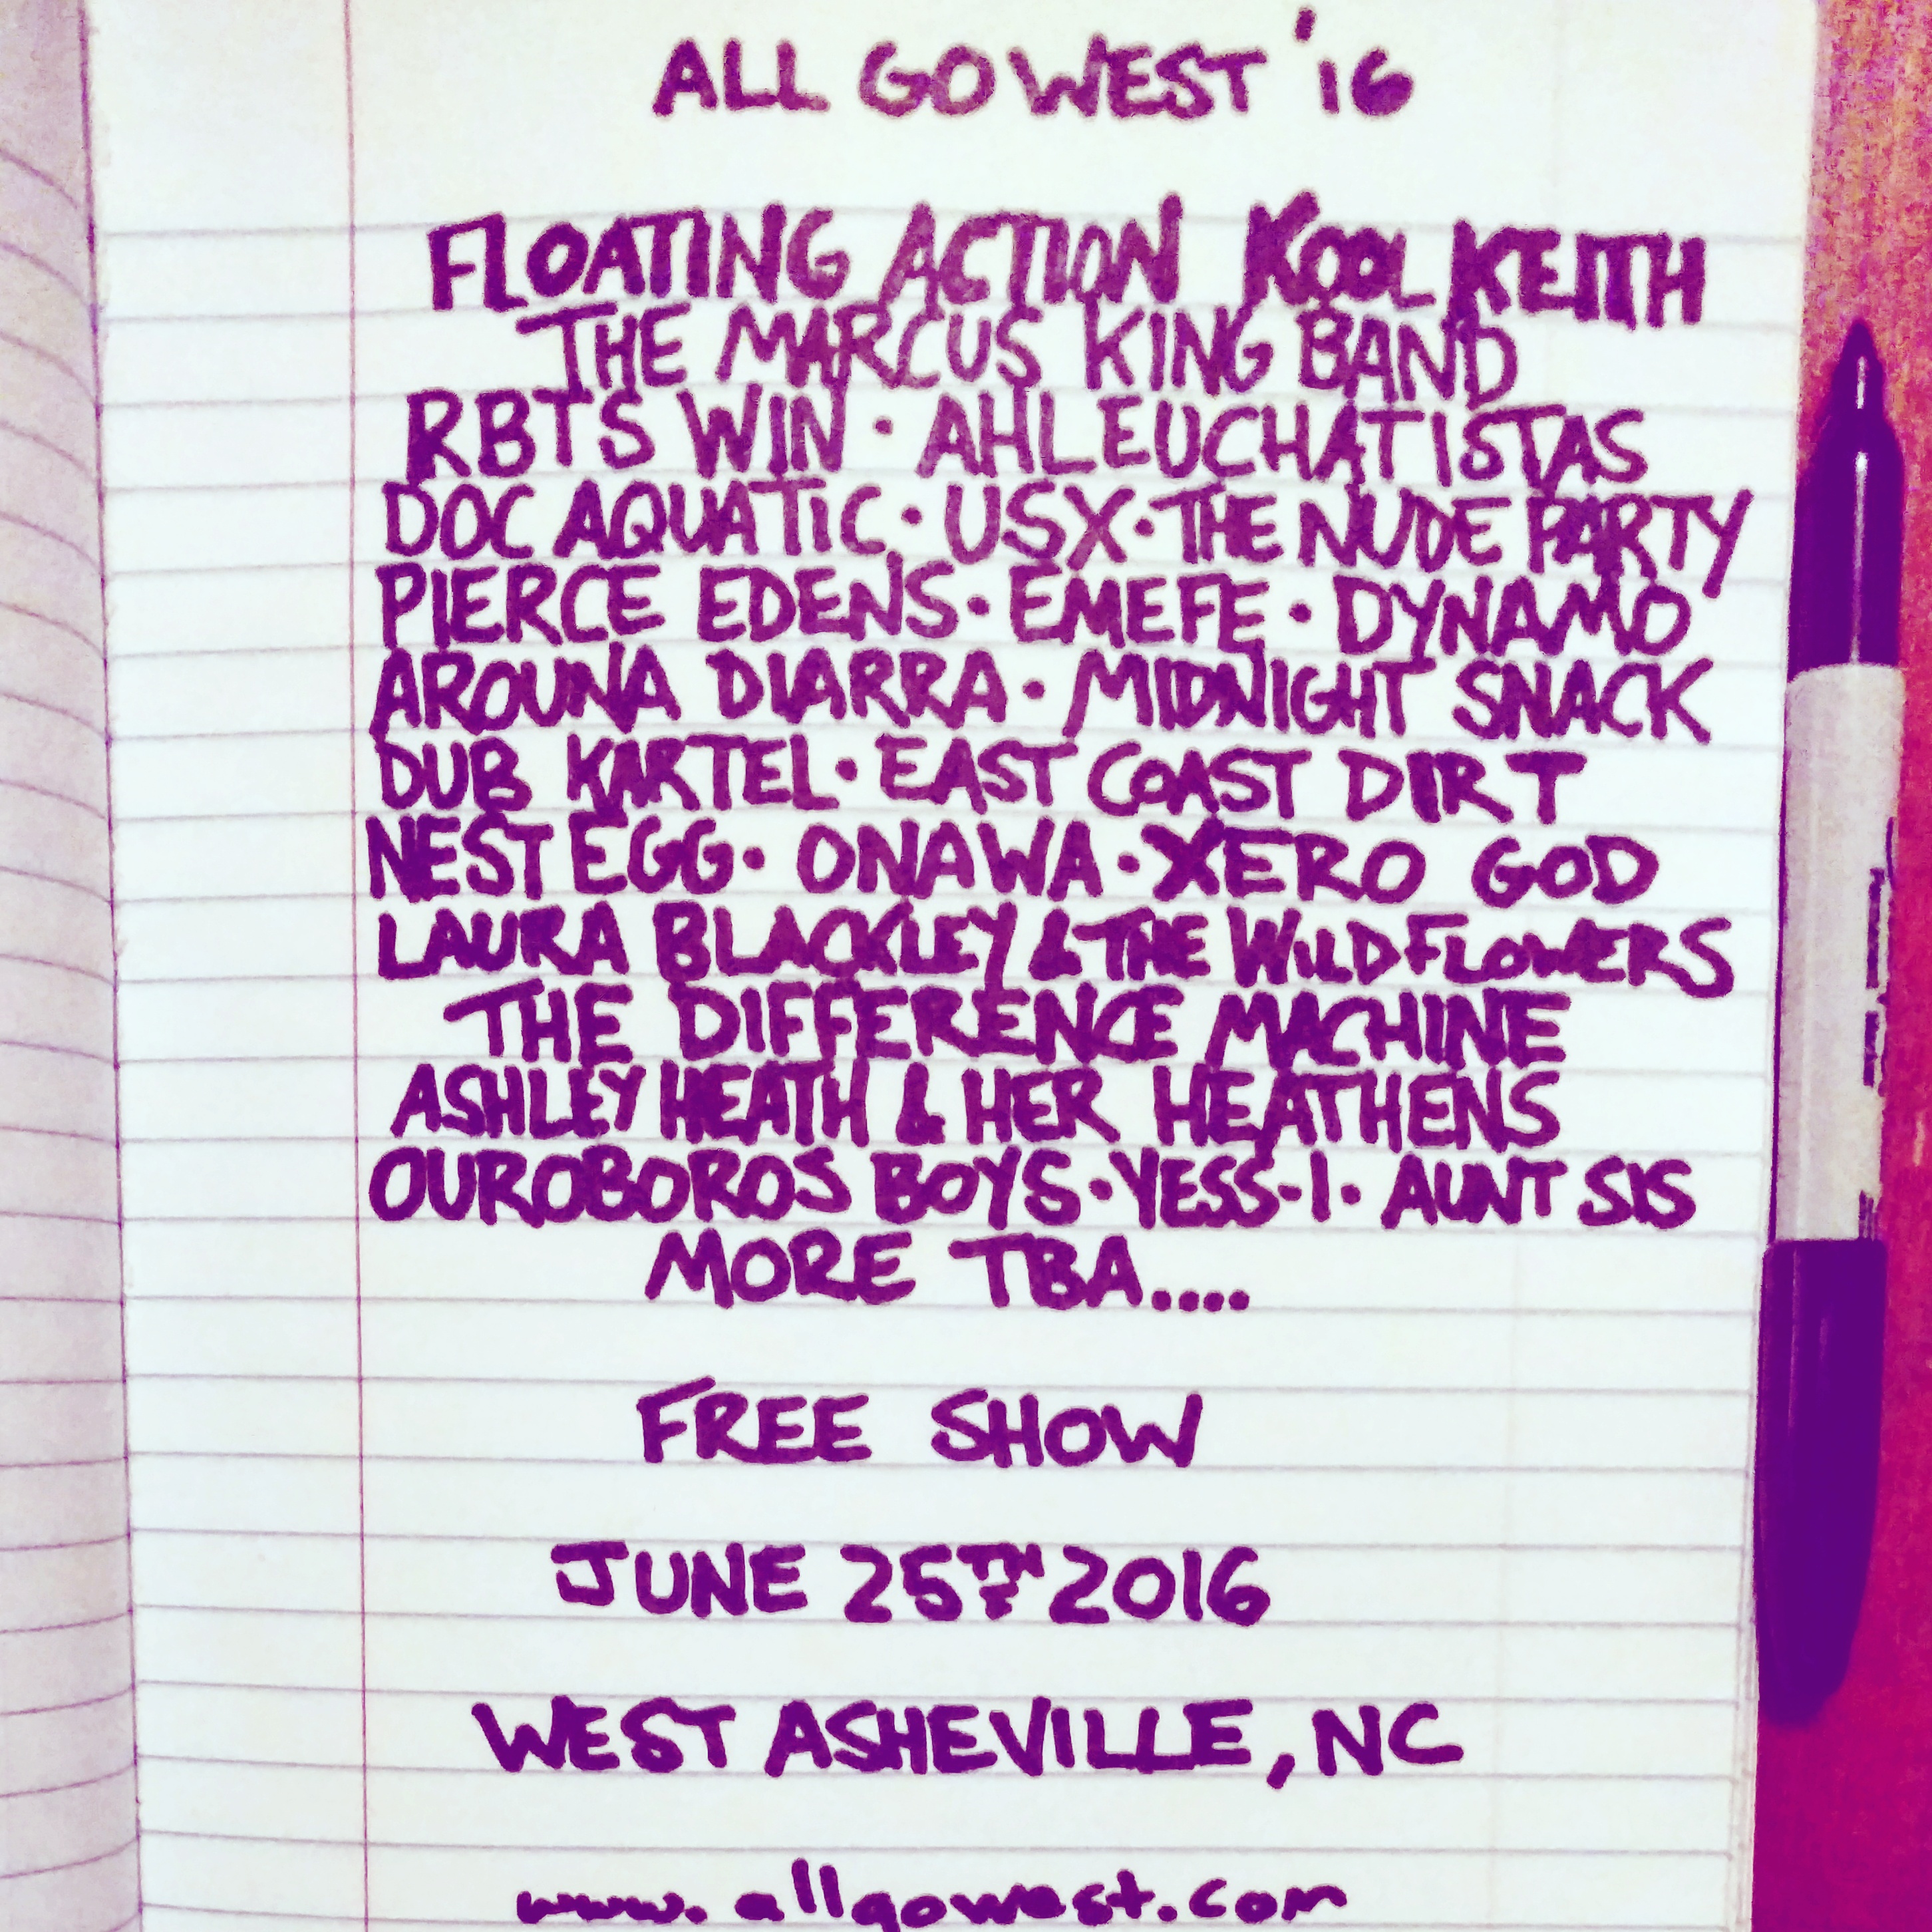 All Go West lineup